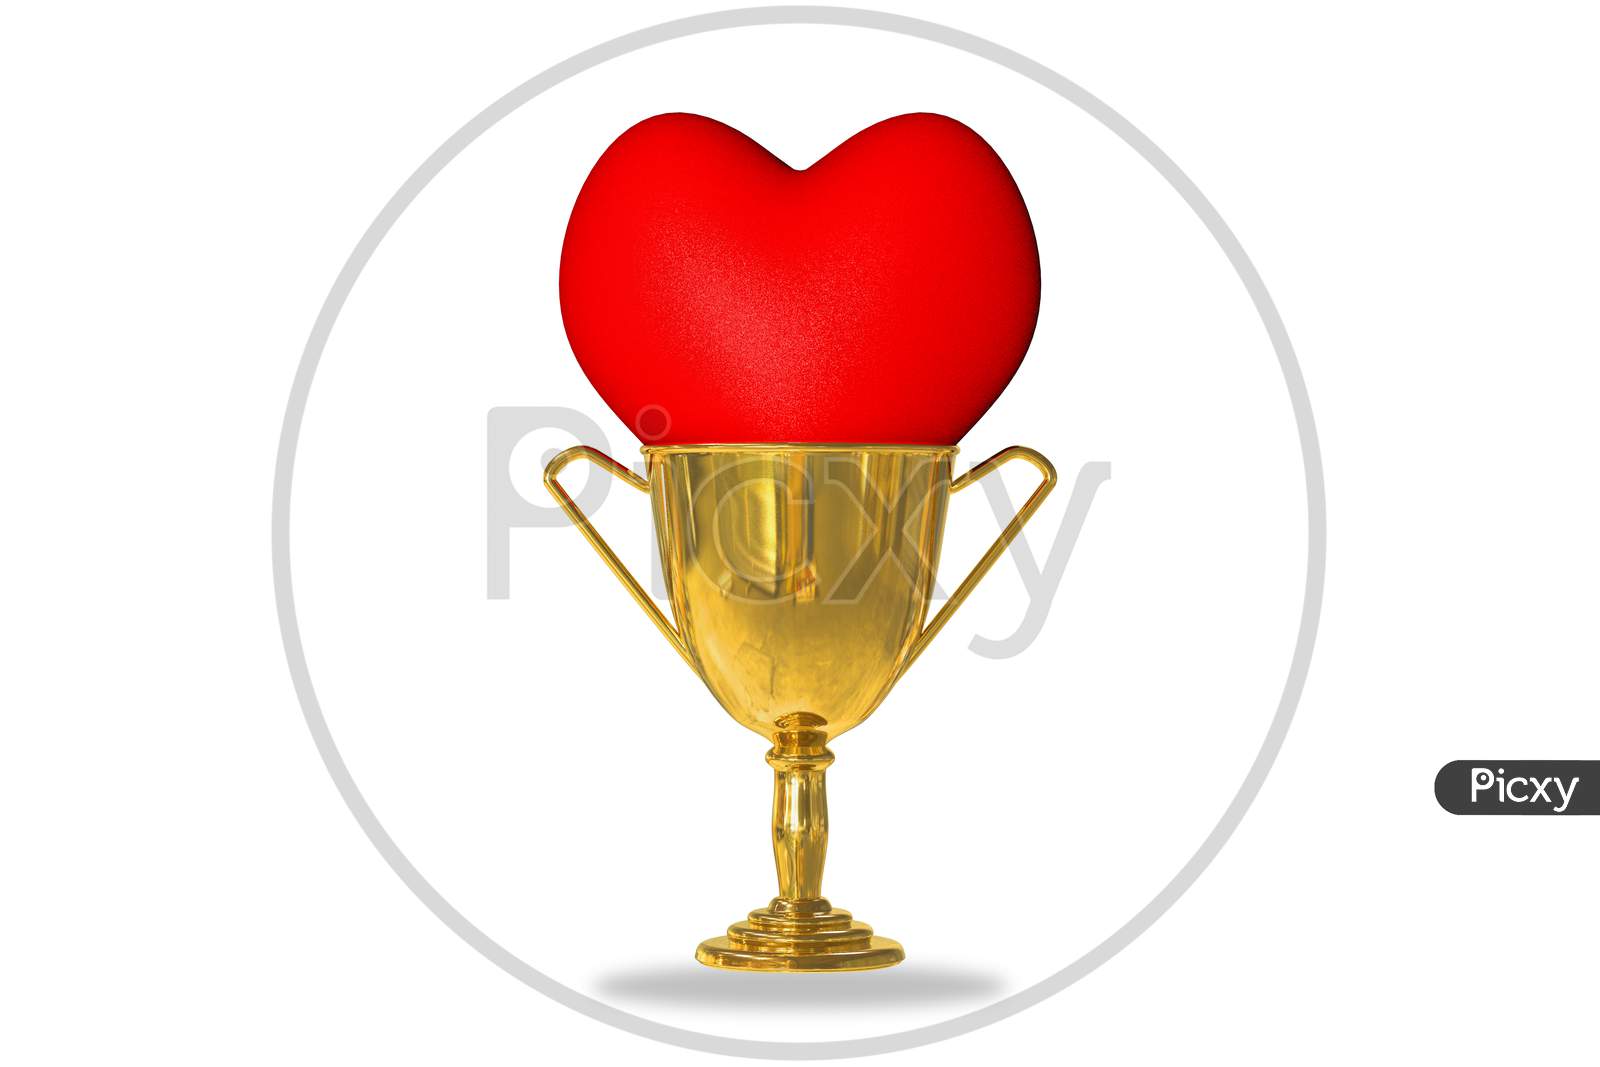 Golden Trophy Cup Isolated On White Background With Red Heart Inside. Healthcare Medical Or First Aid Or Power Or Confidence Or Ceremony Need For Change In Health Care And Win Concept. 3D Illustration